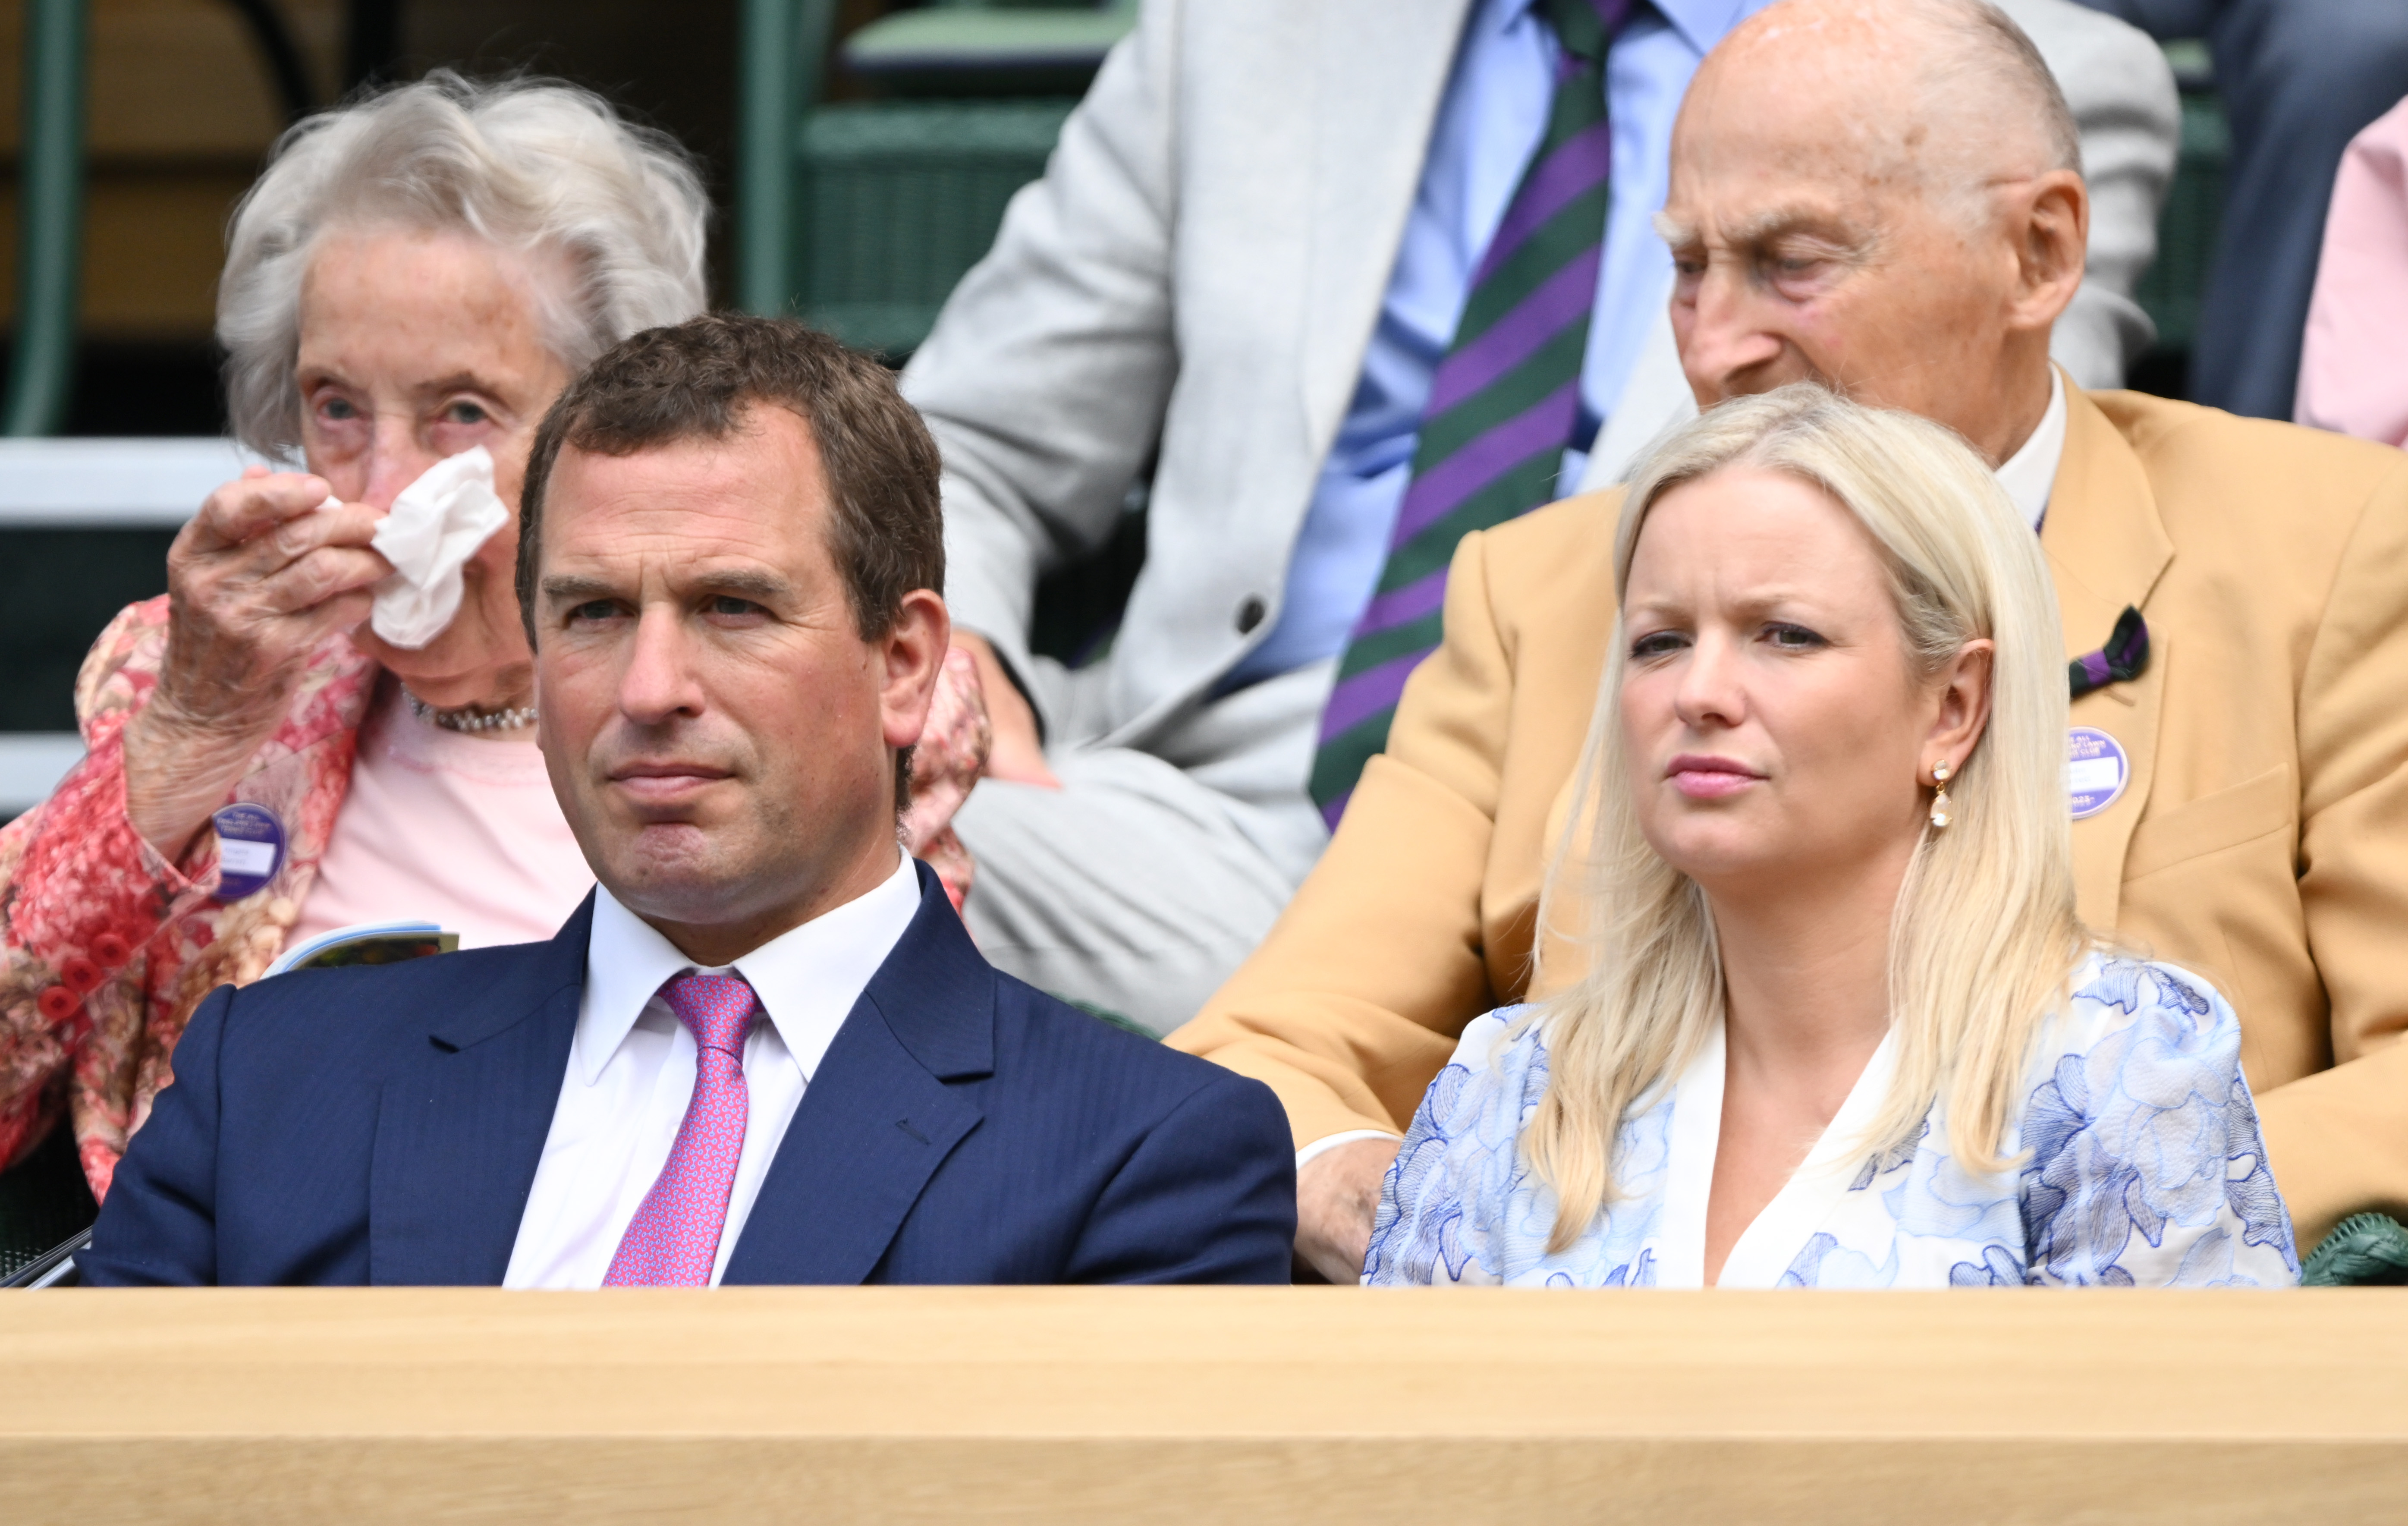 Peter Phillips and Lindsay Wallace during Day 10 of the Wimbledon Tennis Championships in London, England on July 12, 2023 | Source: Getty Images